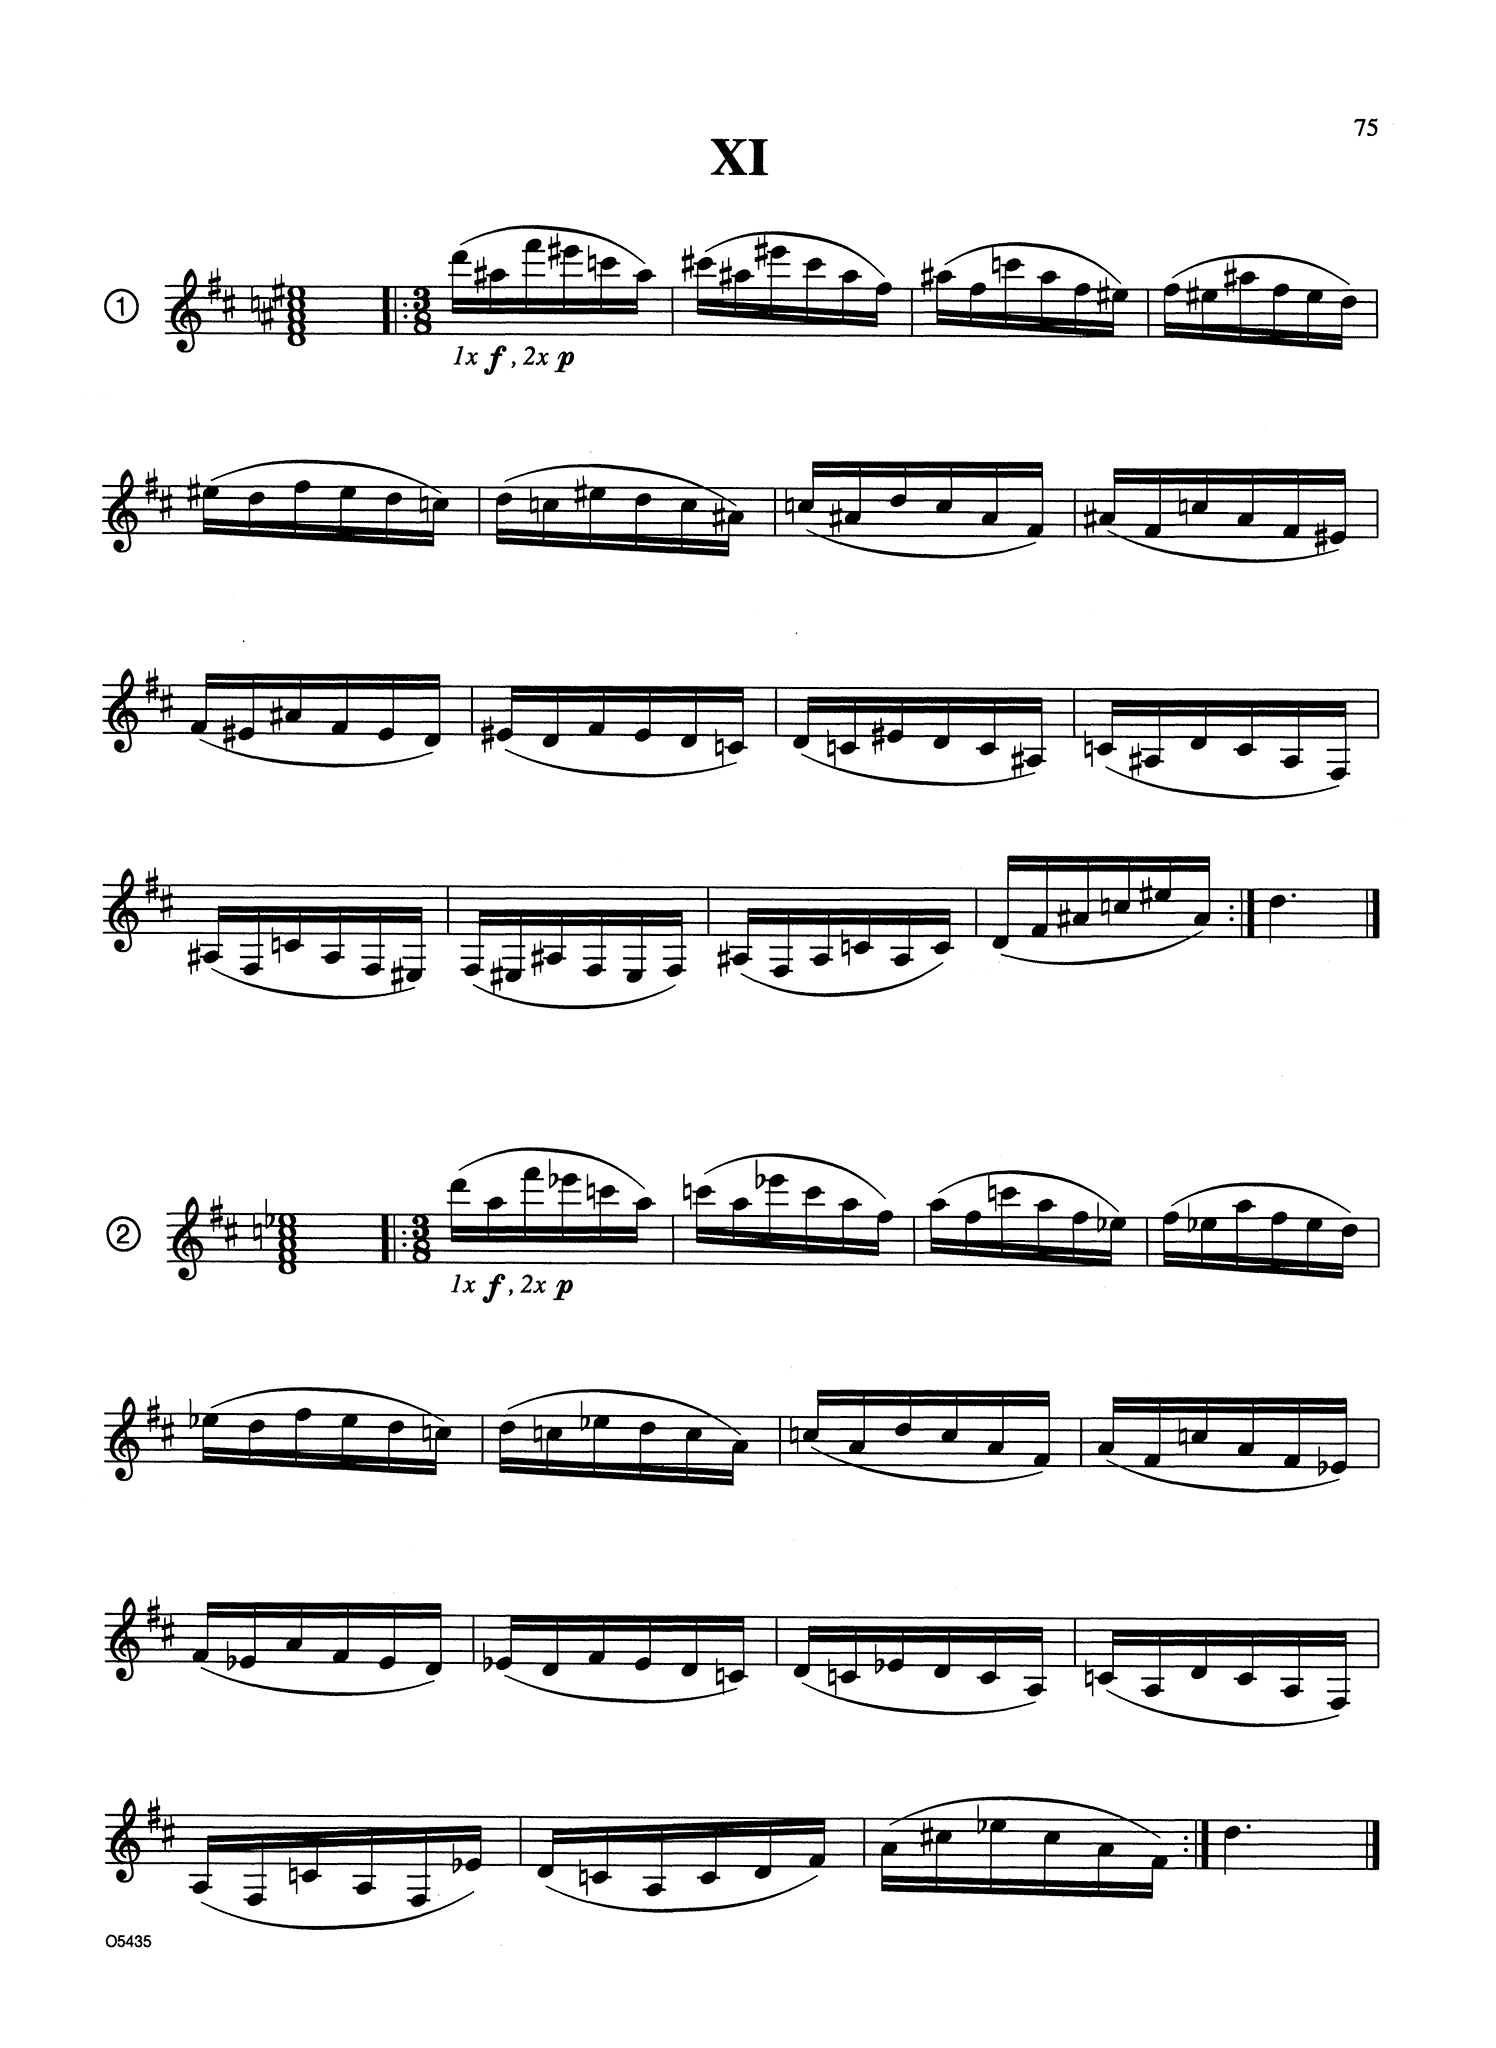 Advanced Contemporary Chordal Sequences for Clarinet Page 75